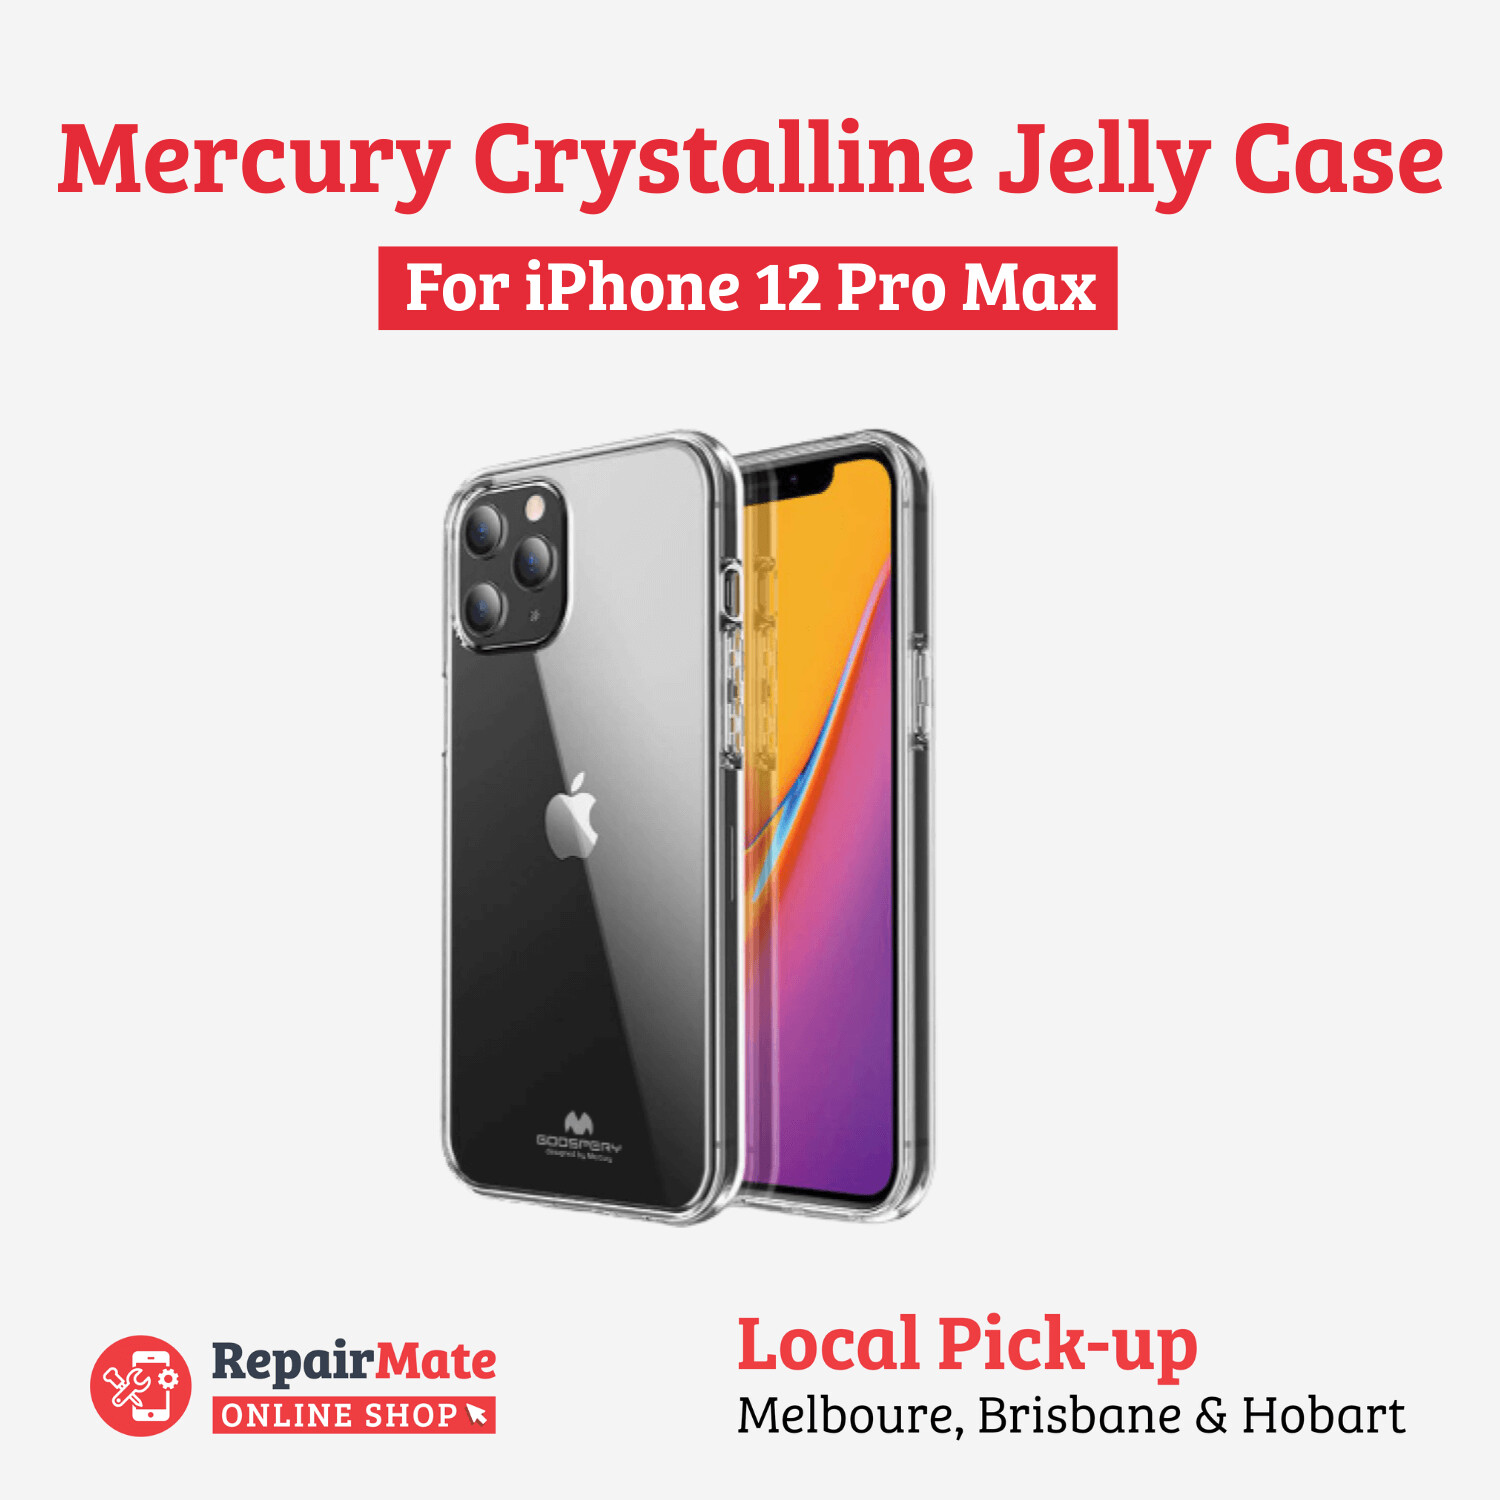 iPhone 12 Pro Max Mercury Crystalline Jelly Case Cover